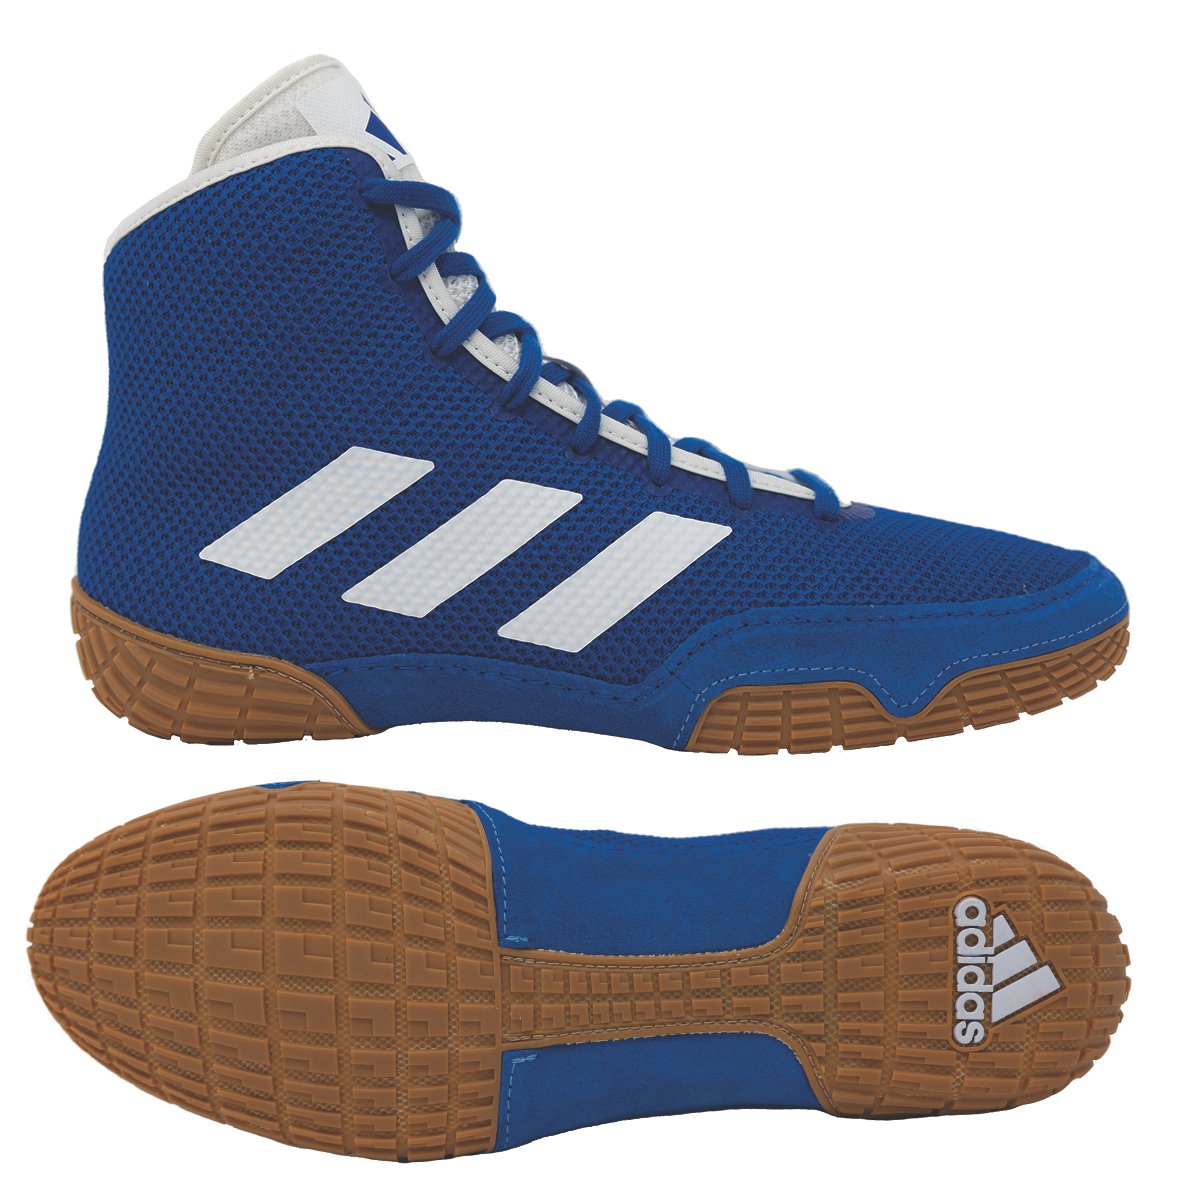 NEW - adidas Tech Fall 2.0 Wrestling Shoe, color: Royal/White - Click Image to Close